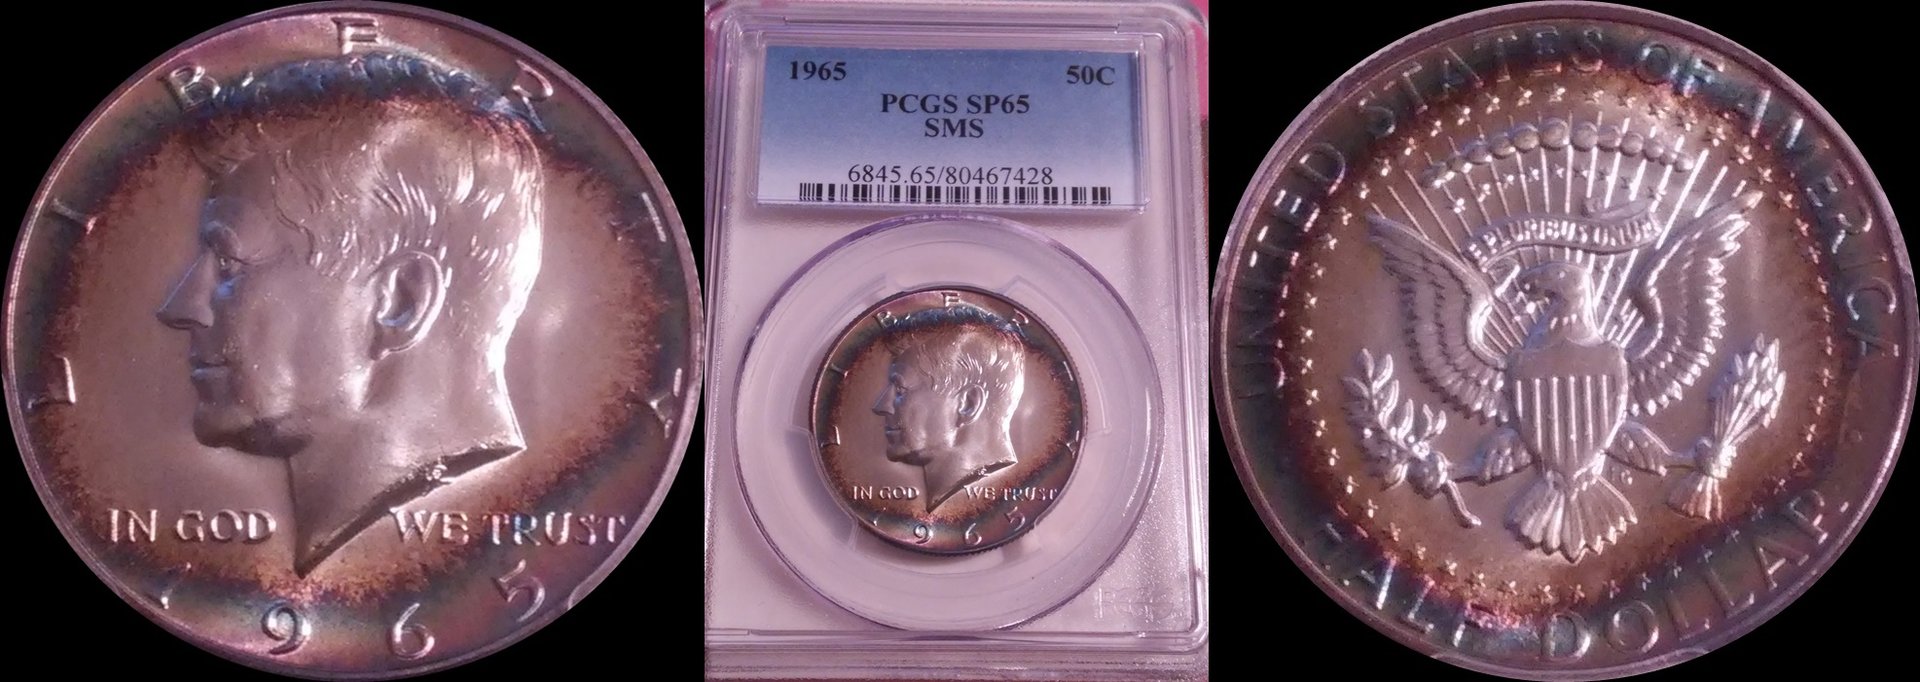 1965 50c sms toned a-horz.jpg